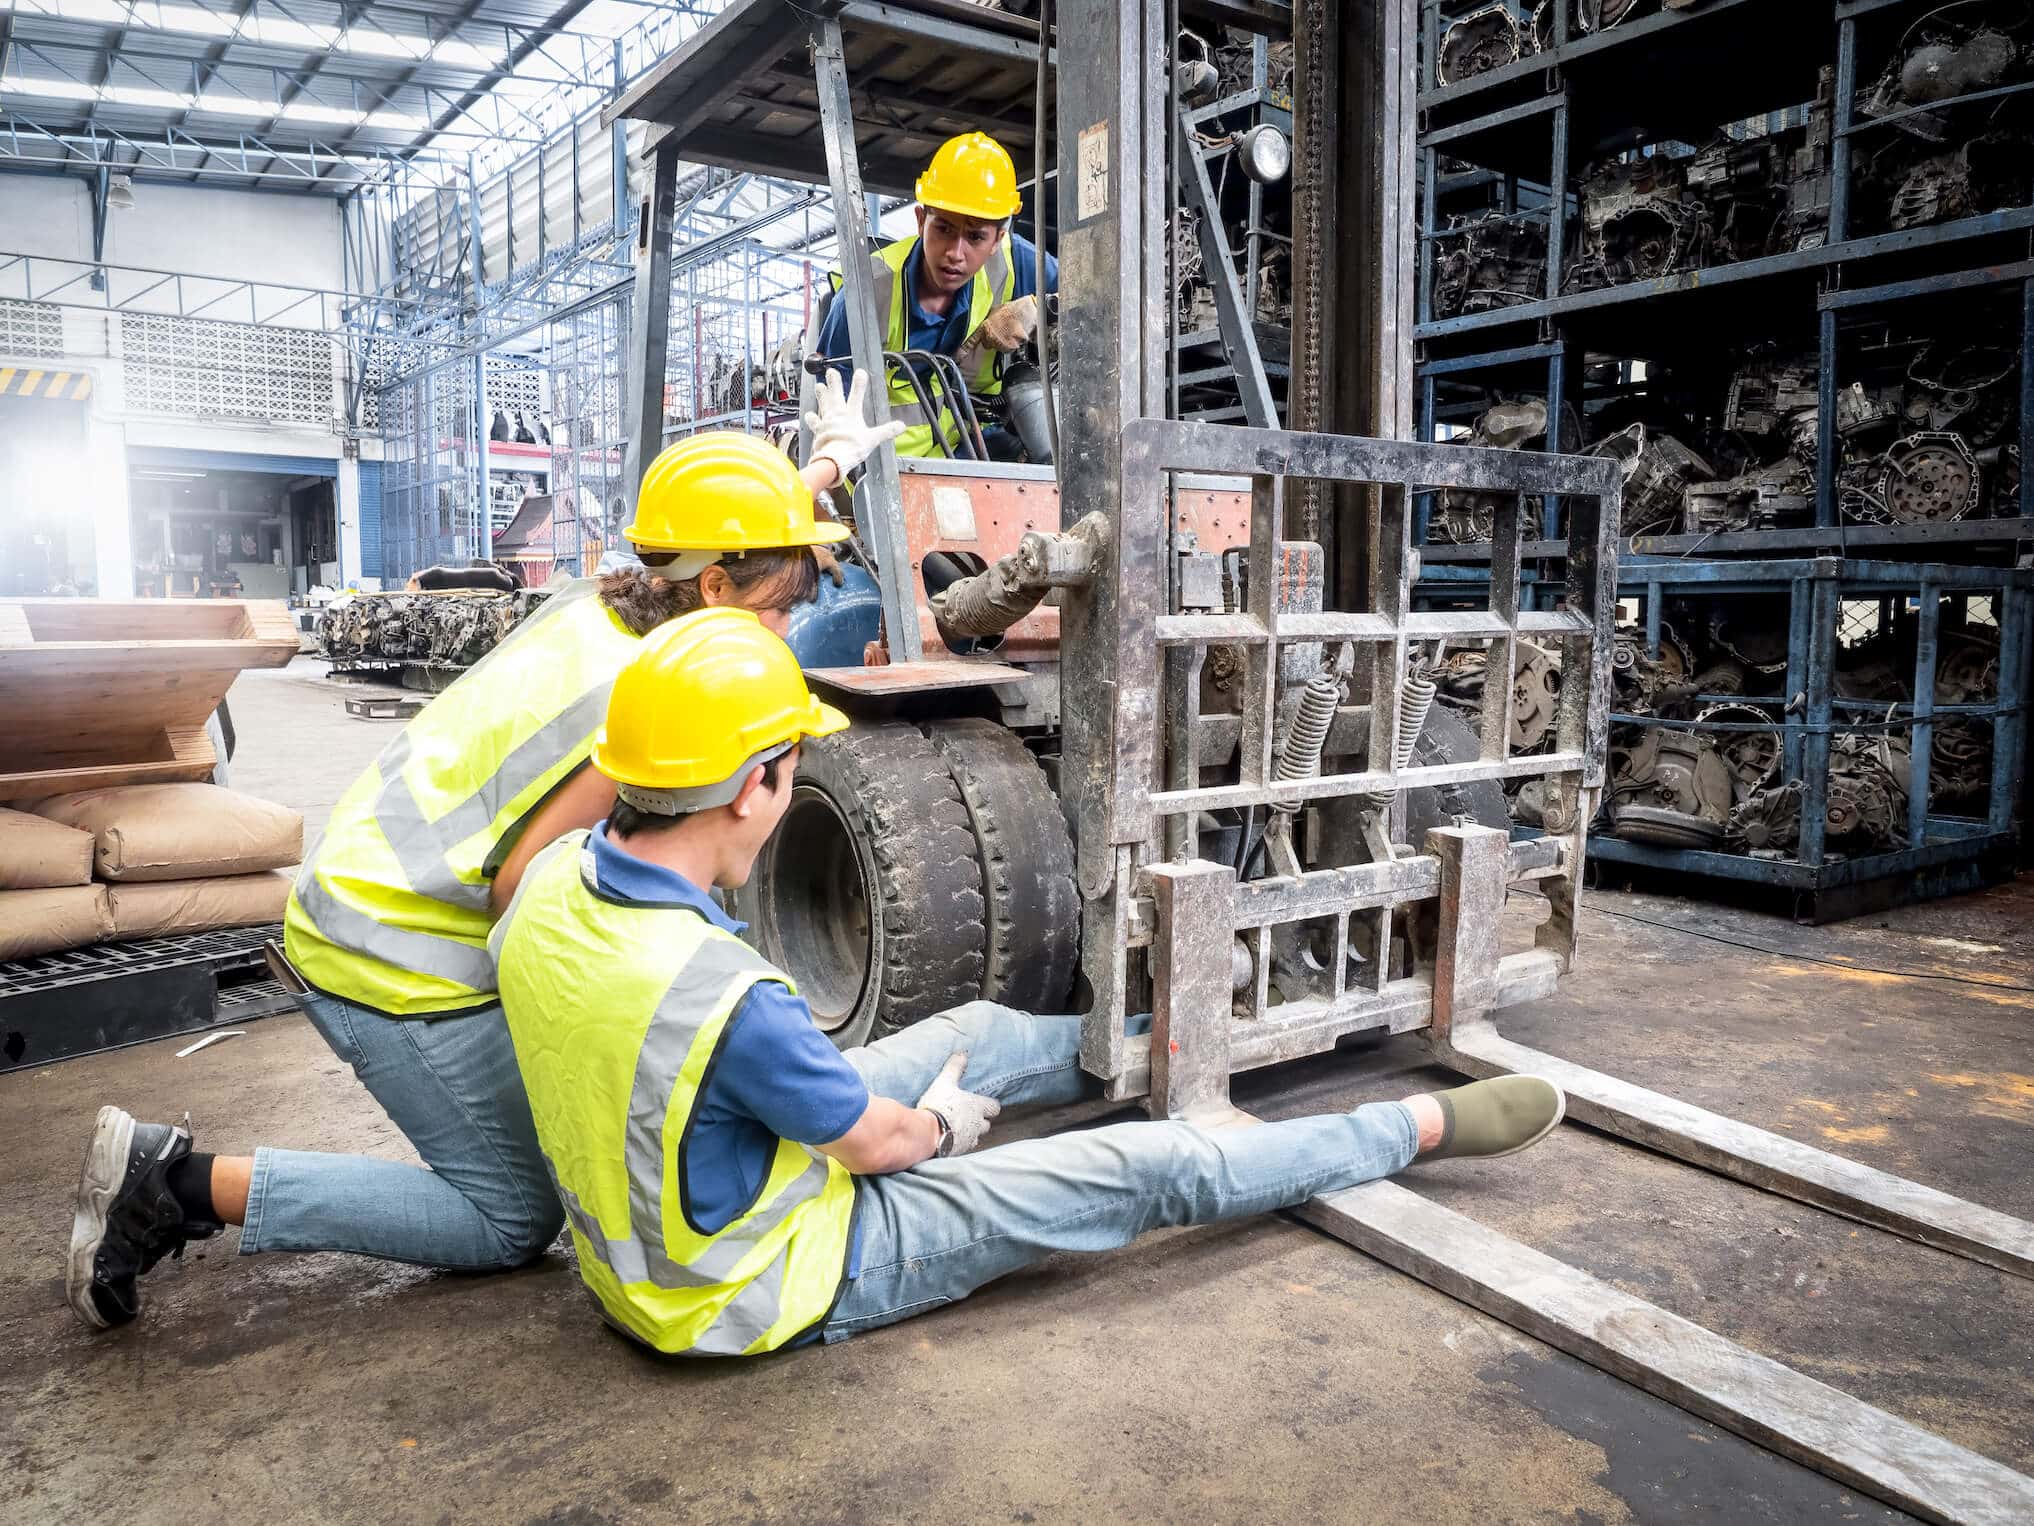 How much is each body part worth in a work accident